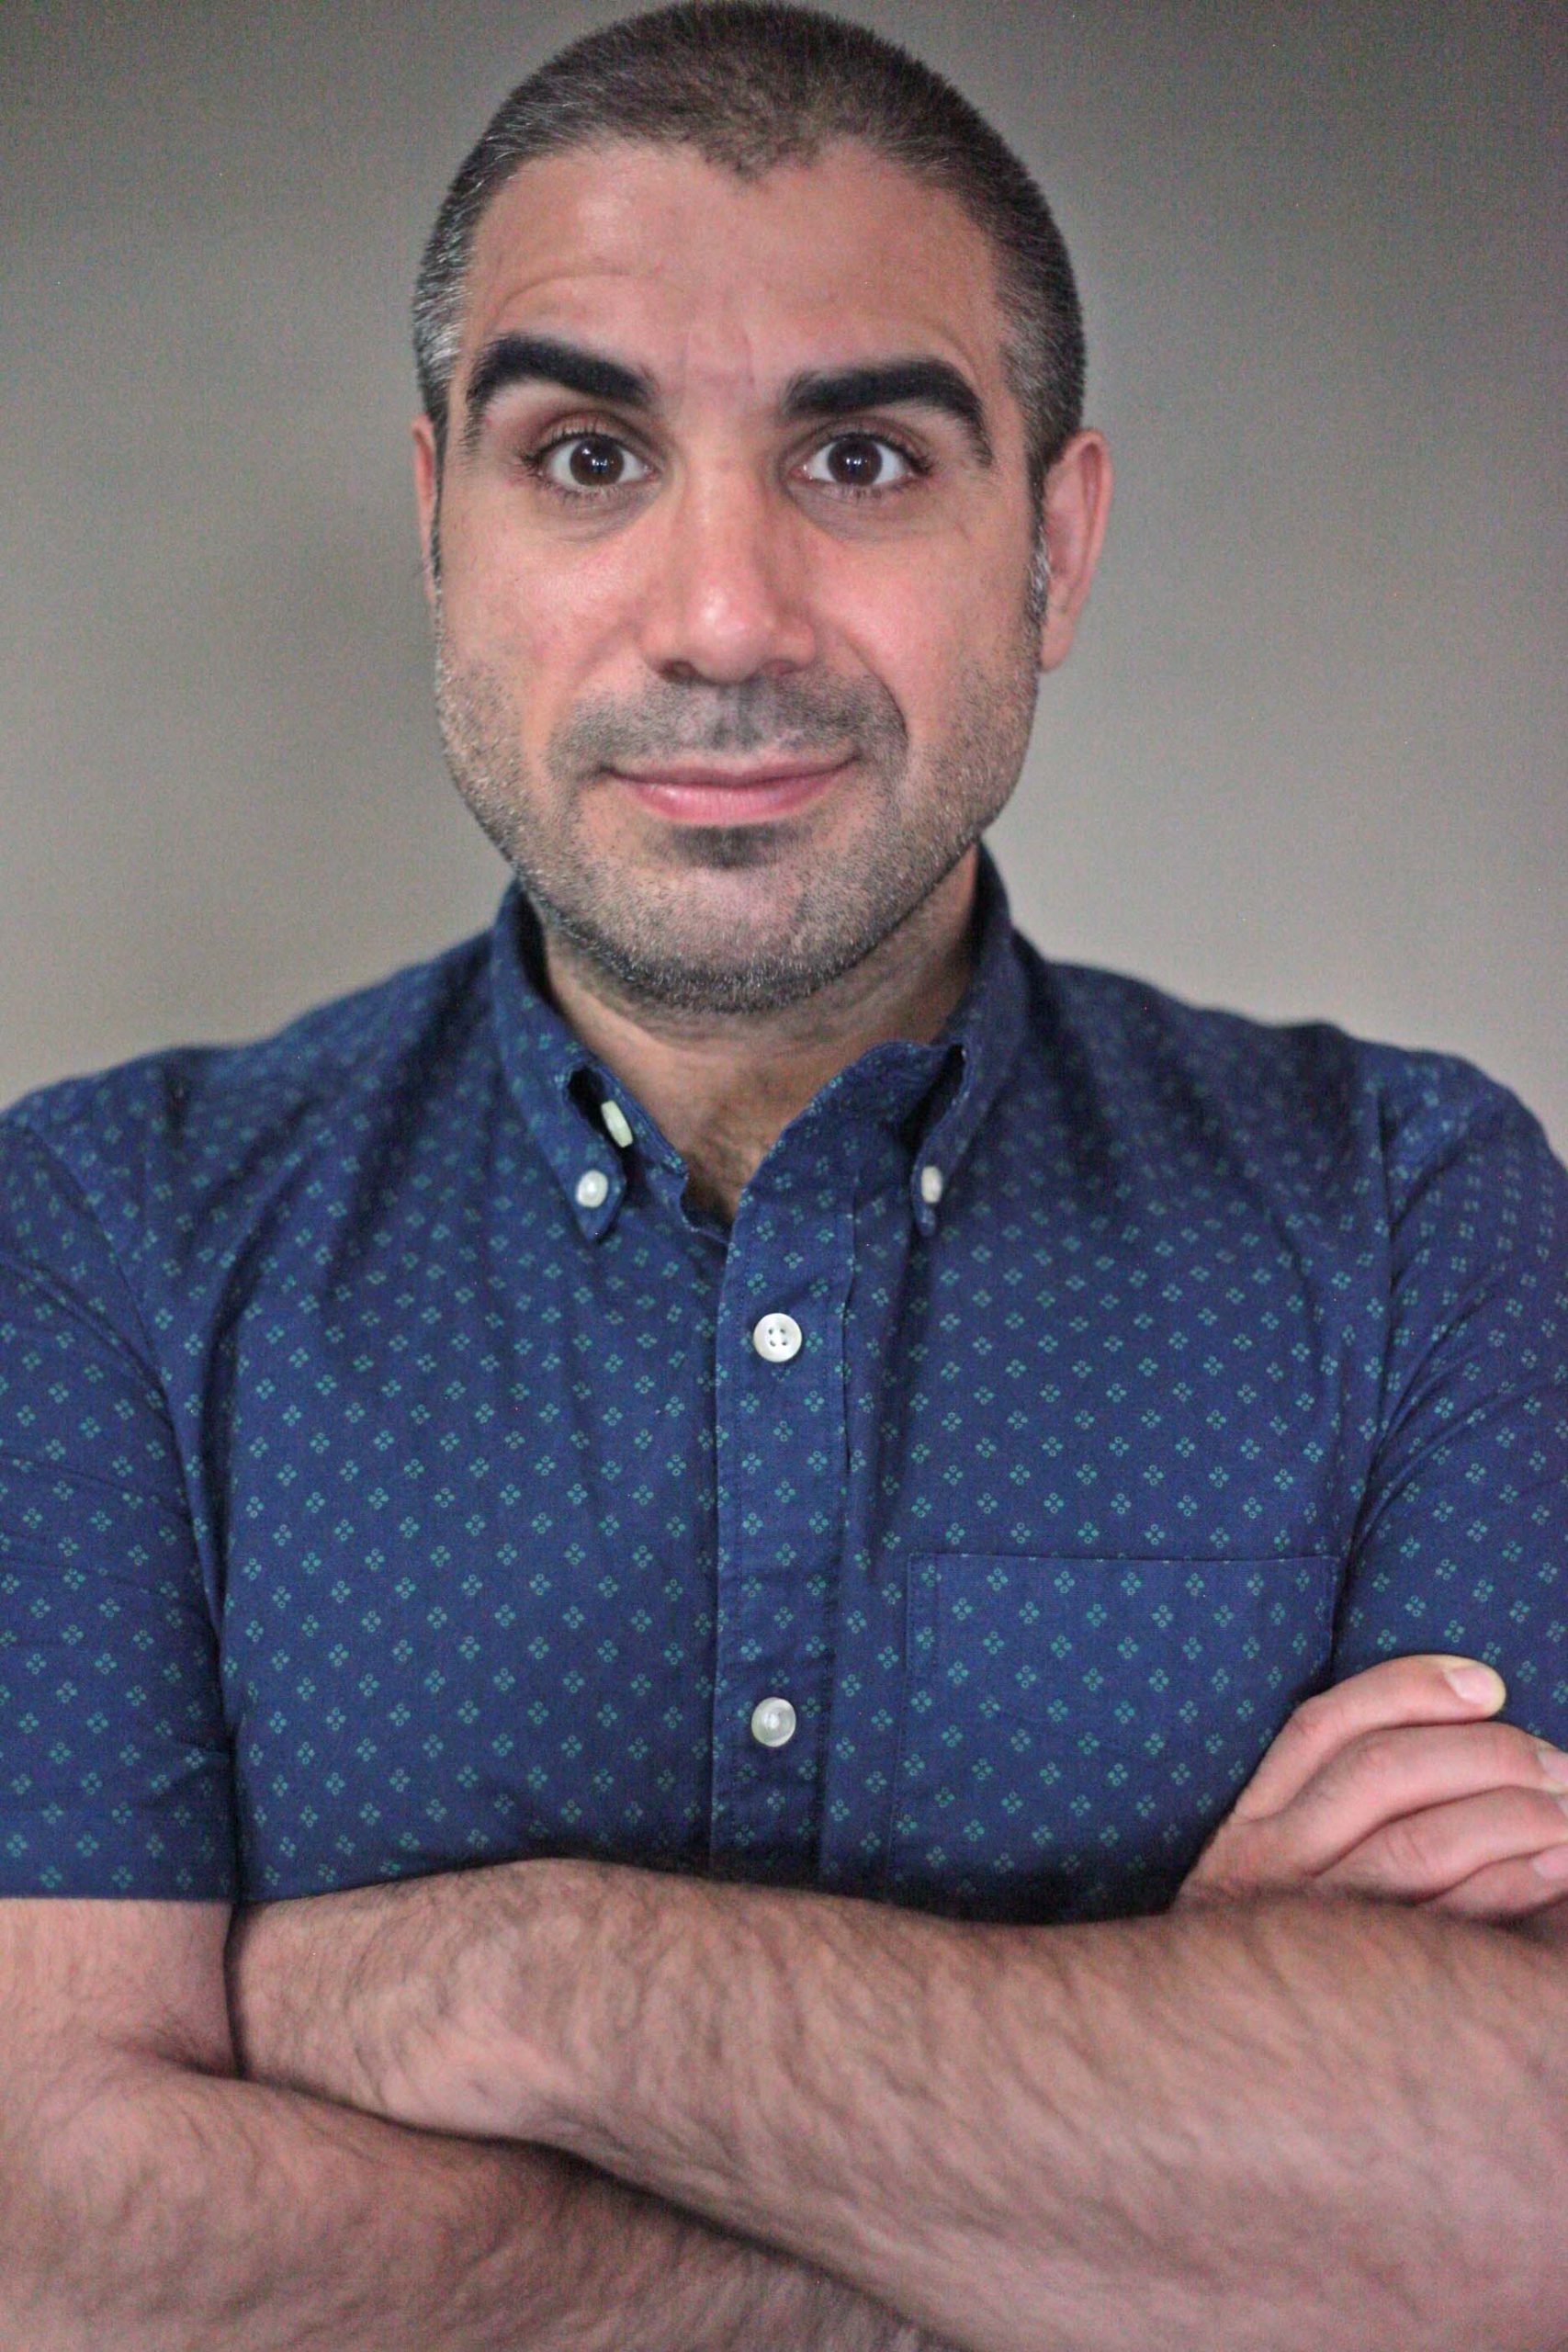 Mike Mosallam headshot with arms folded, wearing a dark blue collared shirt, grey background